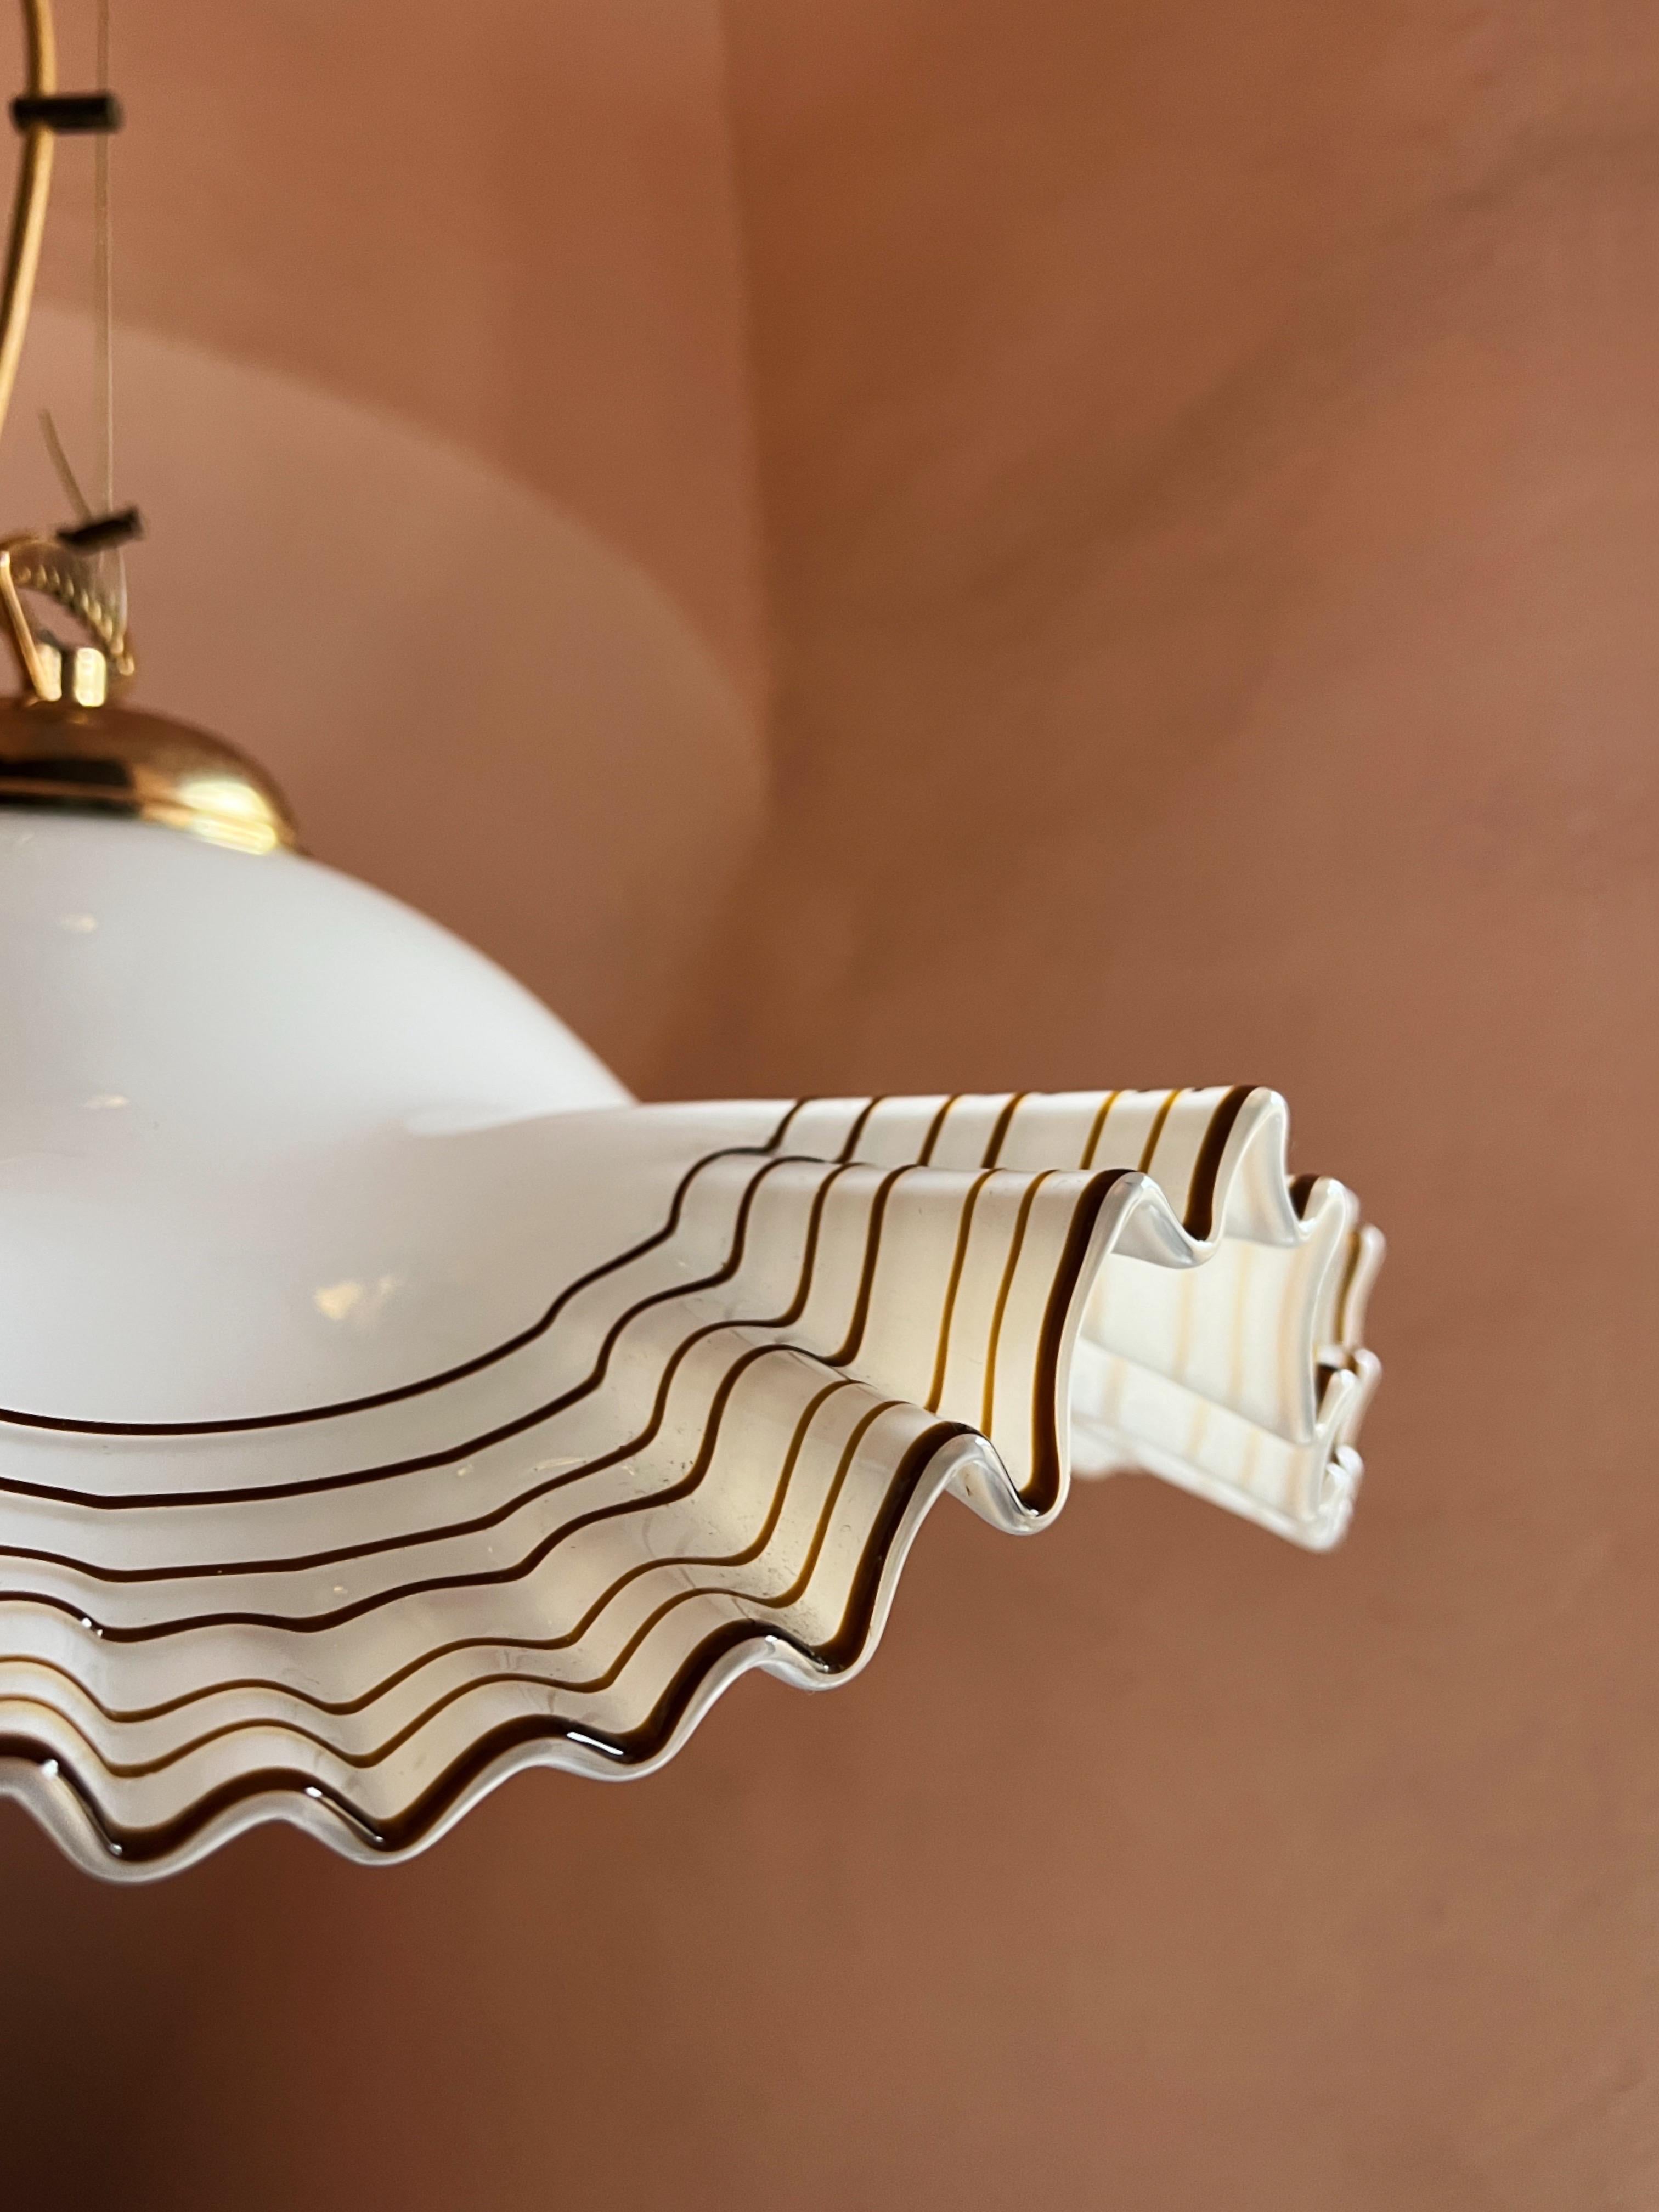 Ceiling light by Murano De Majo, Italy 1970s. Beyond beautiful with its brown coloured trim. Wire is adjustable to ceiling. Height with wire is 150 cm/59 inches.